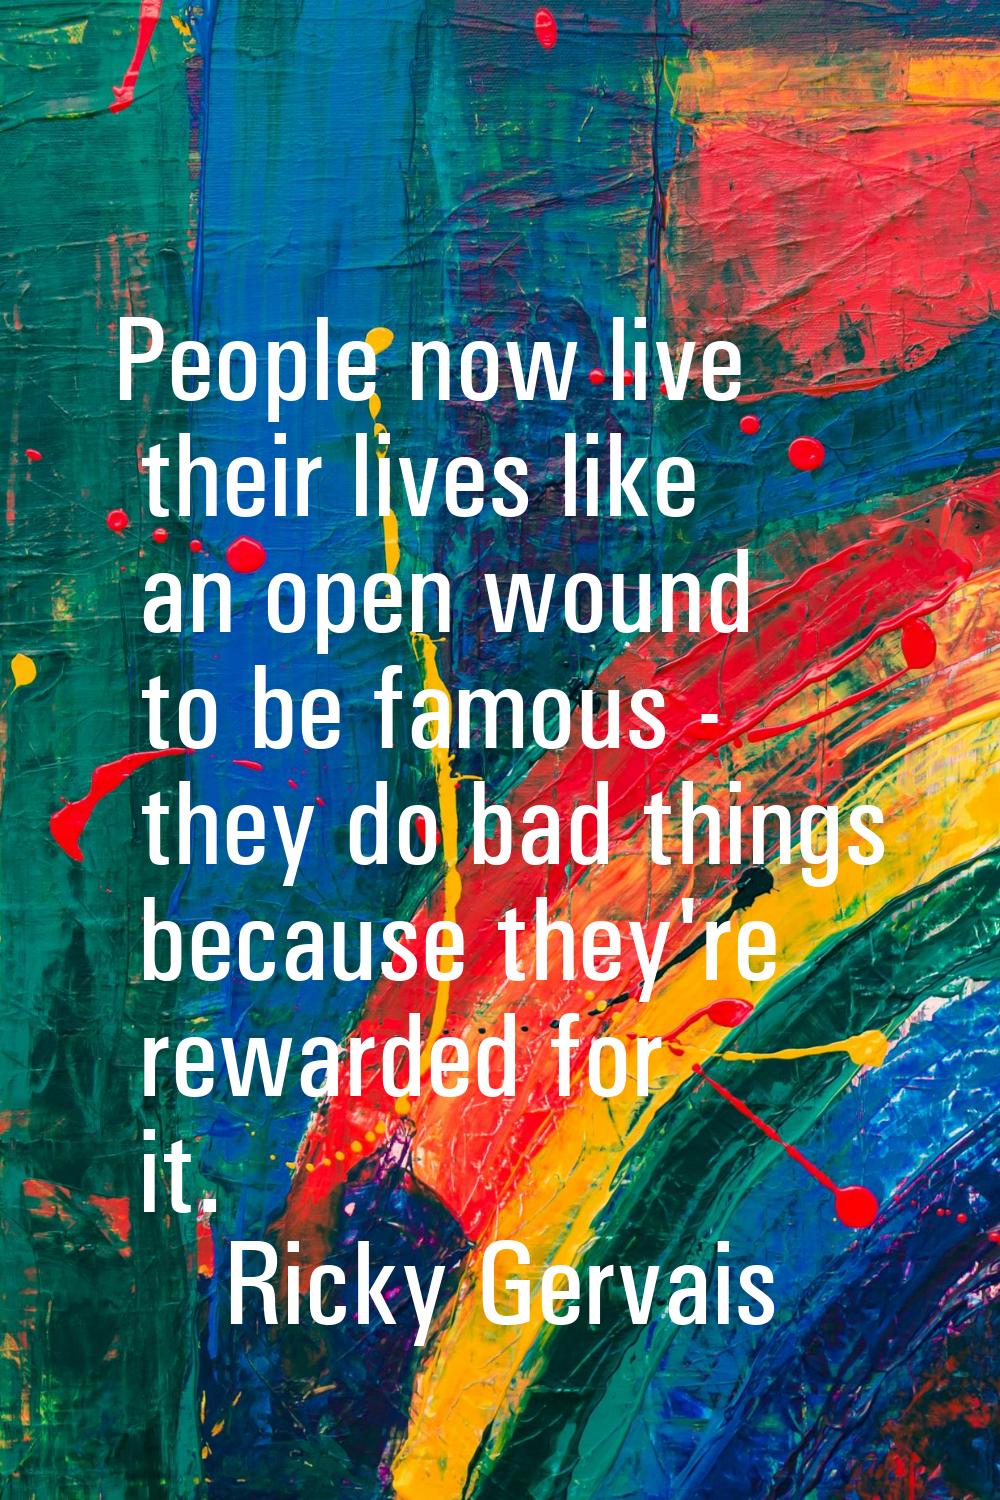 People now live their lives like an open wound to be famous - they do bad things because they're re